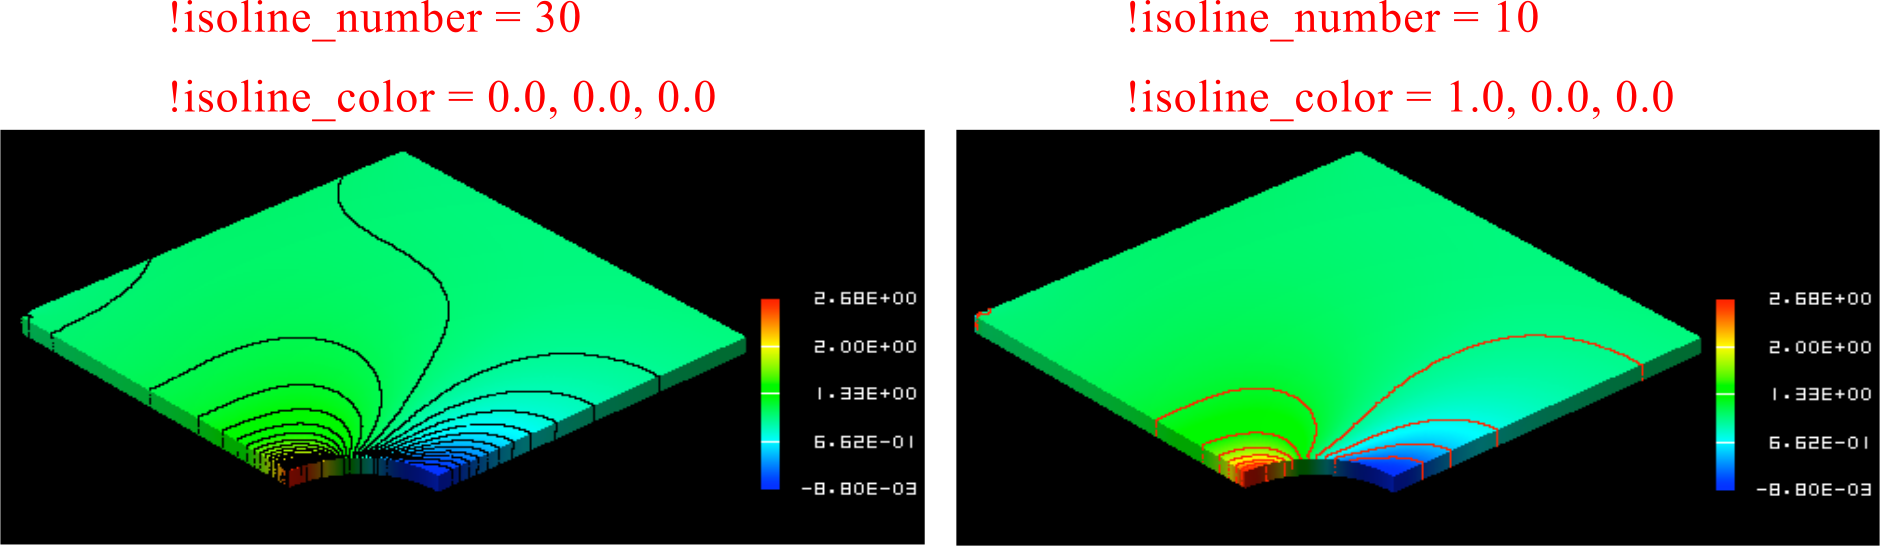 Example of isoline_number and isoline_color Setting